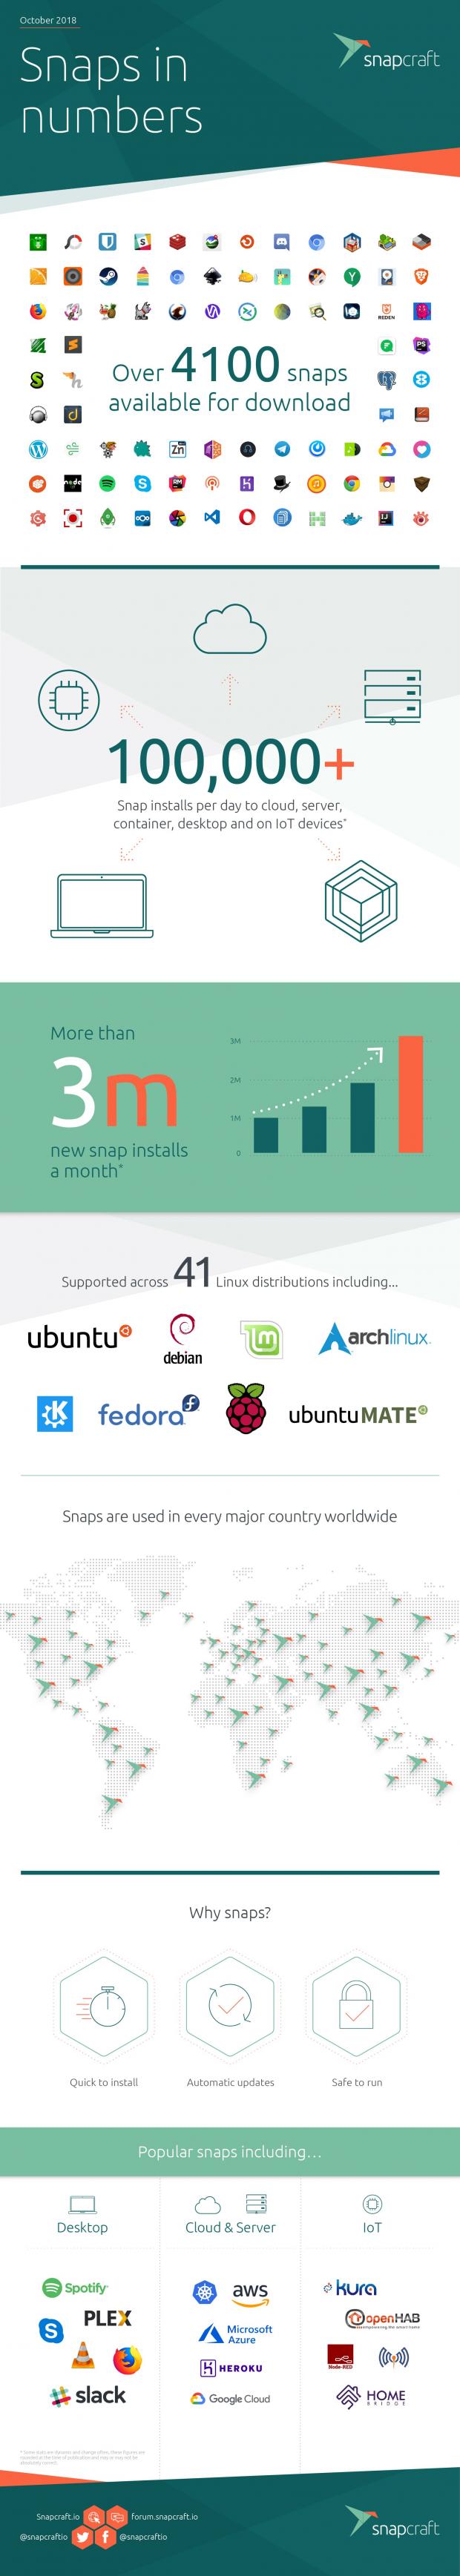 Snaps in numbers inforgraphic